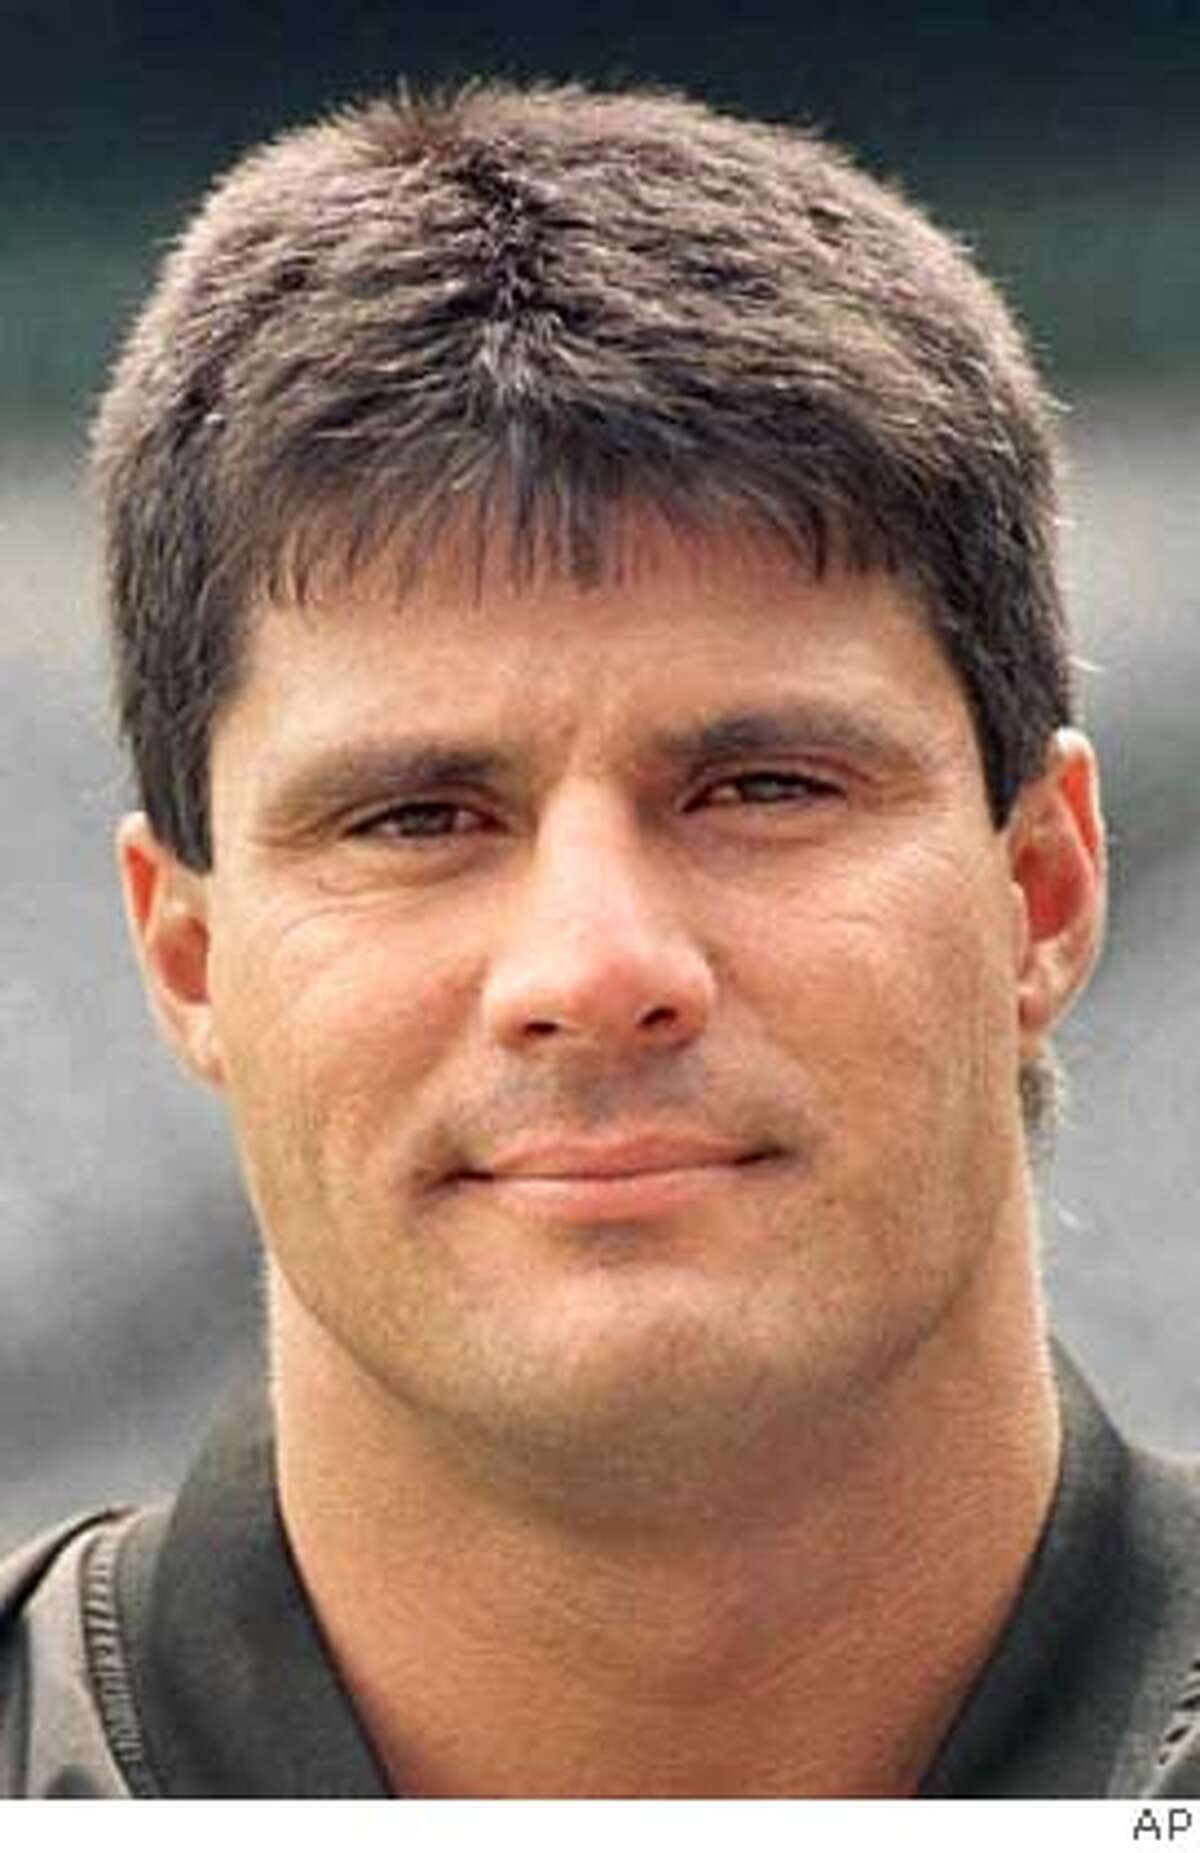 FILE--Jose Canseco, shown in this 2000 file photo, agreed Wednesday, June 20, 2001 to a one-year contract with the Chicago White Sox. Canseco must pass a physical Thursday and hopes to be in uniform for the White Sox's game that night in Baltimore, the team said after Wednesday's 2-1 victory over Kansas City. (AP photo/file) CAT